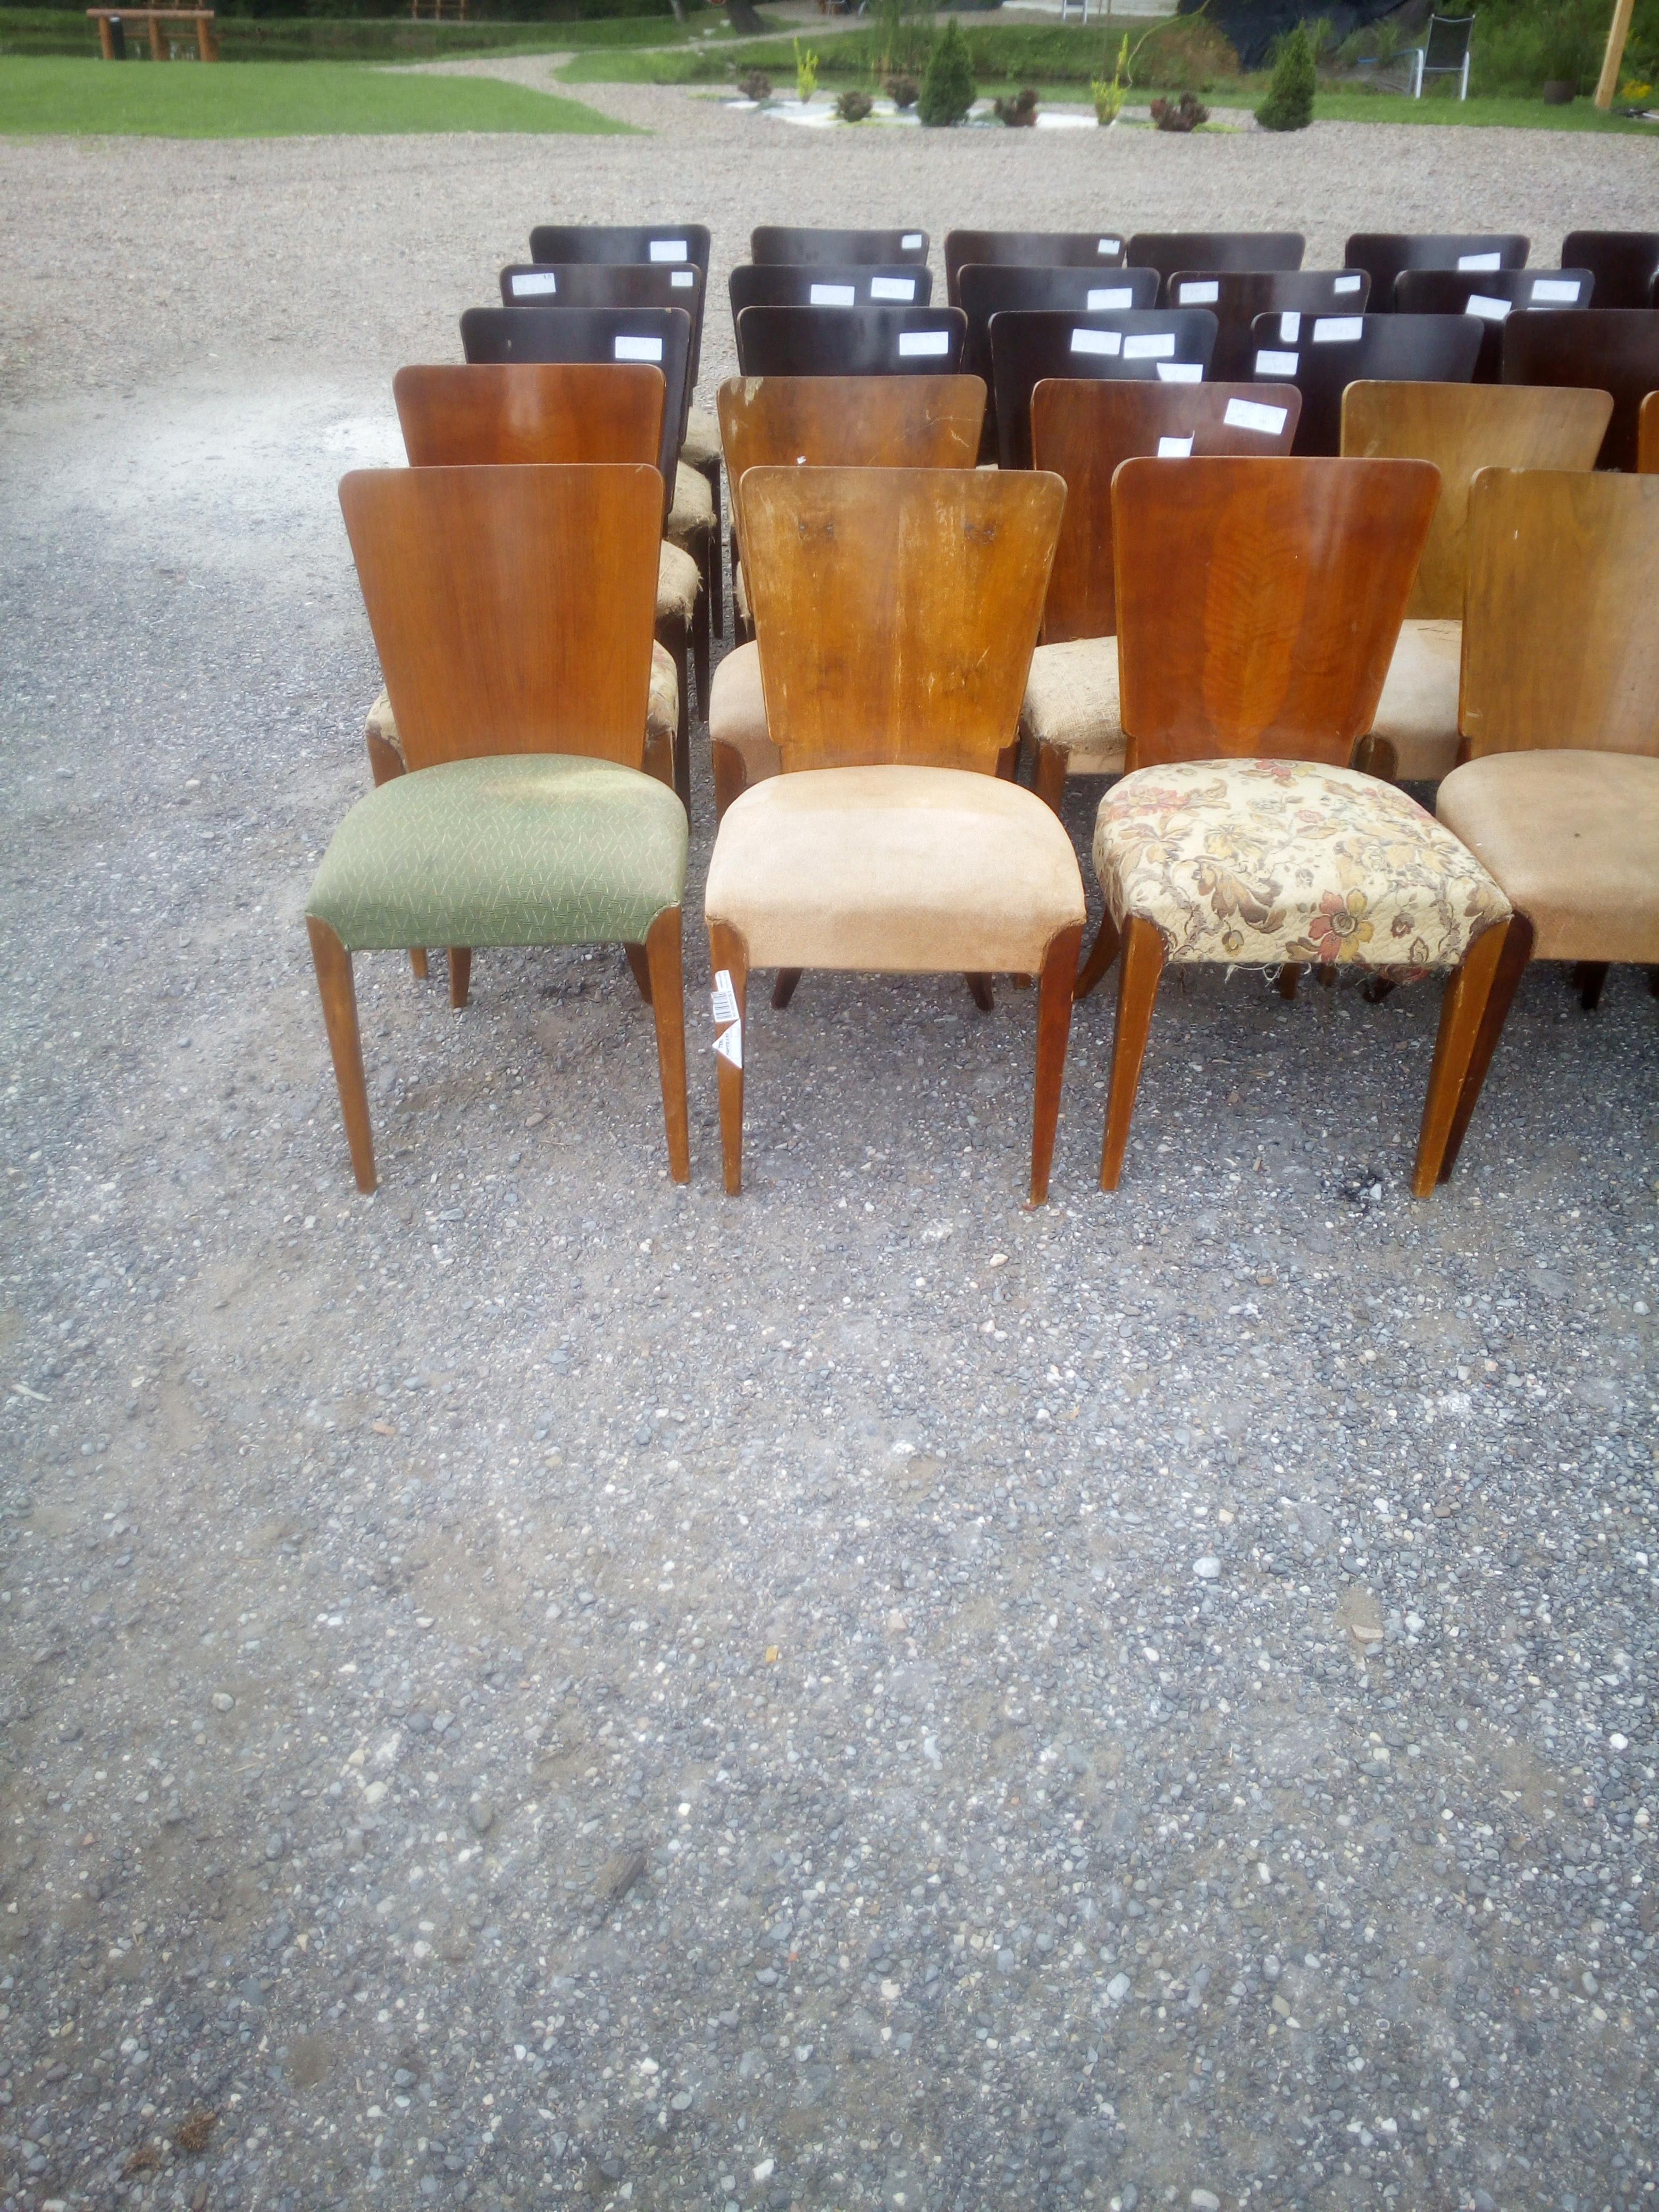 Art Deco chairs by J. Halabal from 1940, 




The possibility of renovation in our studio to any condition of the chairs, matte gloss, etc.

Measures: Width 46cm, depth 46 cm, height 82cm, seat height 46 cm.

We have about 100 pieces